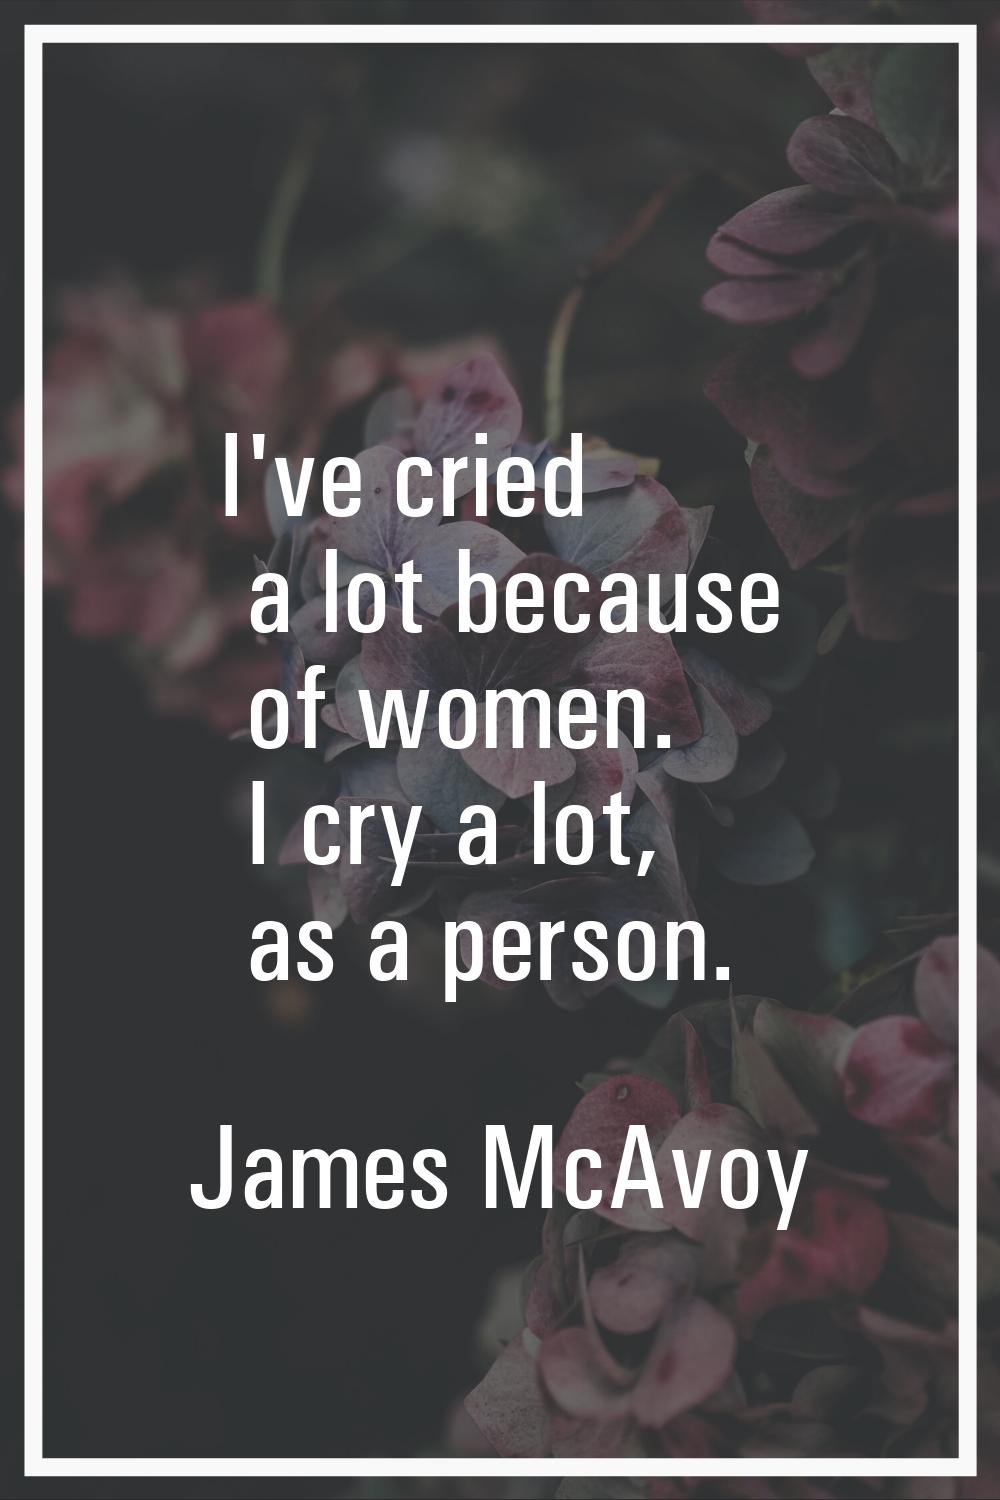 I've cried a lot because of women. I cry a lot, as a person.